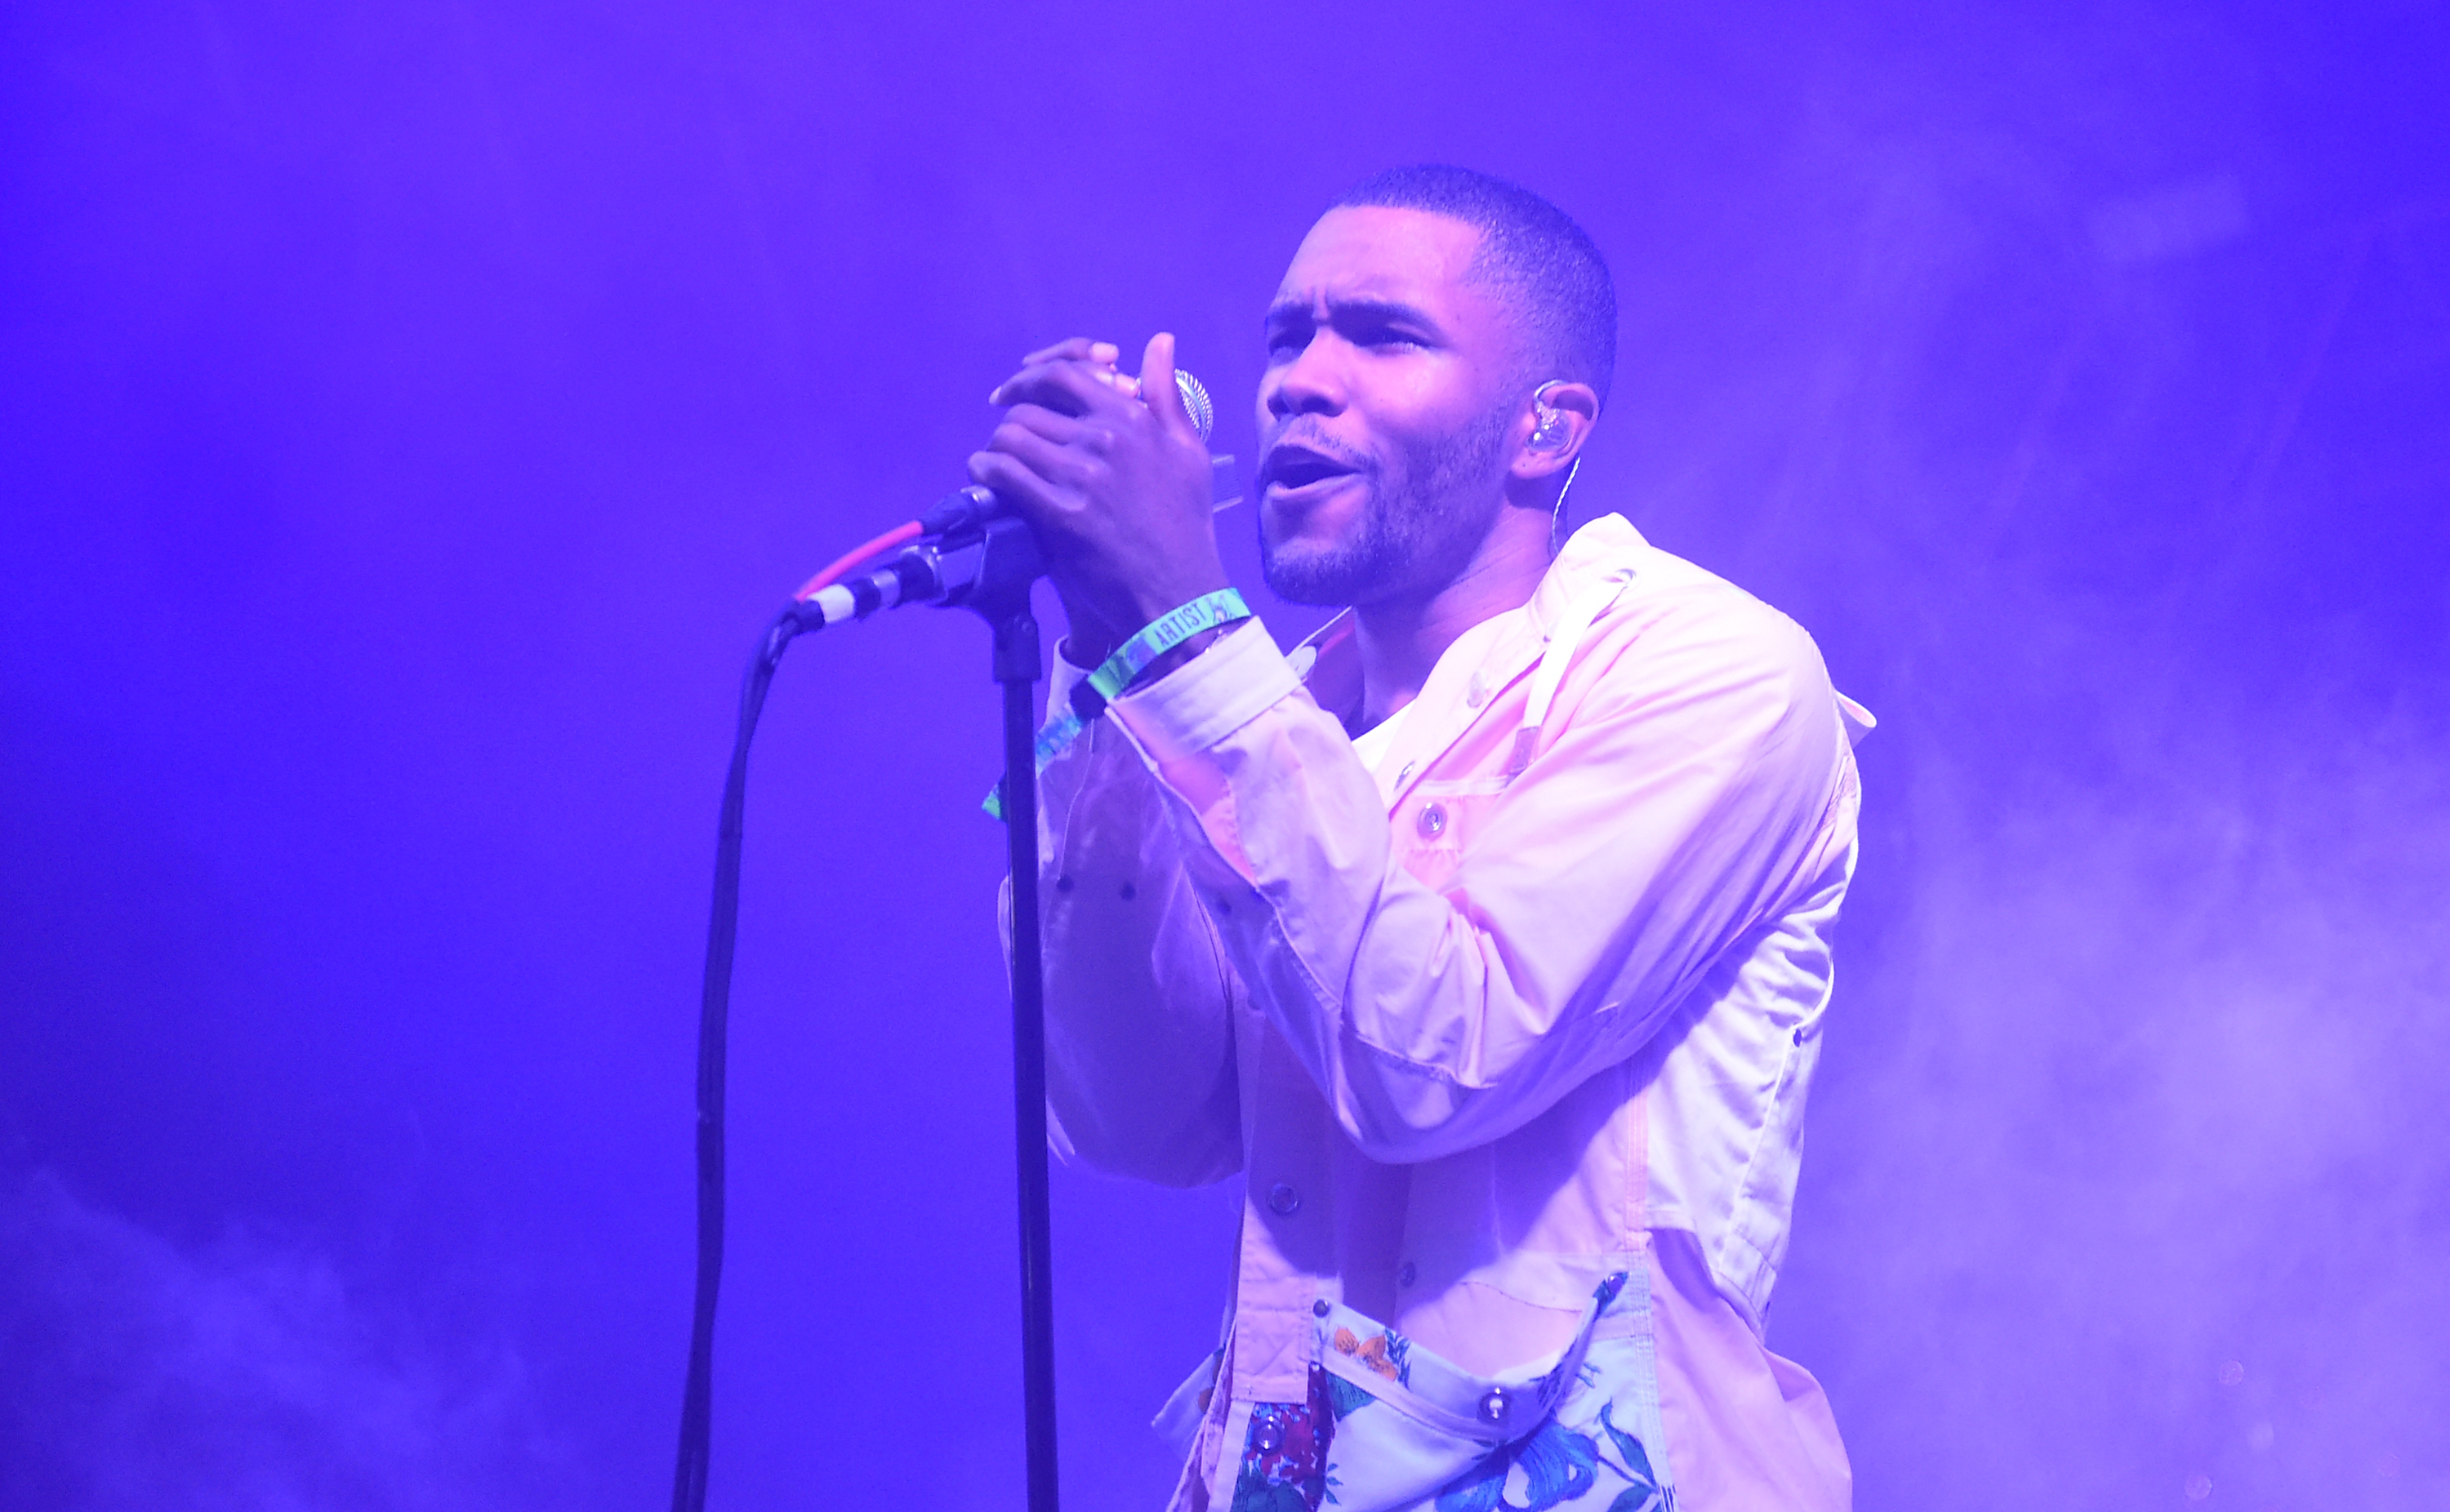 Artist Frank Ocean performs during the 2014 Bonnaroo Music Arts Festival in Manchester, Tennessee on June 14, 2014 (Jason Merritt—Getty Images)